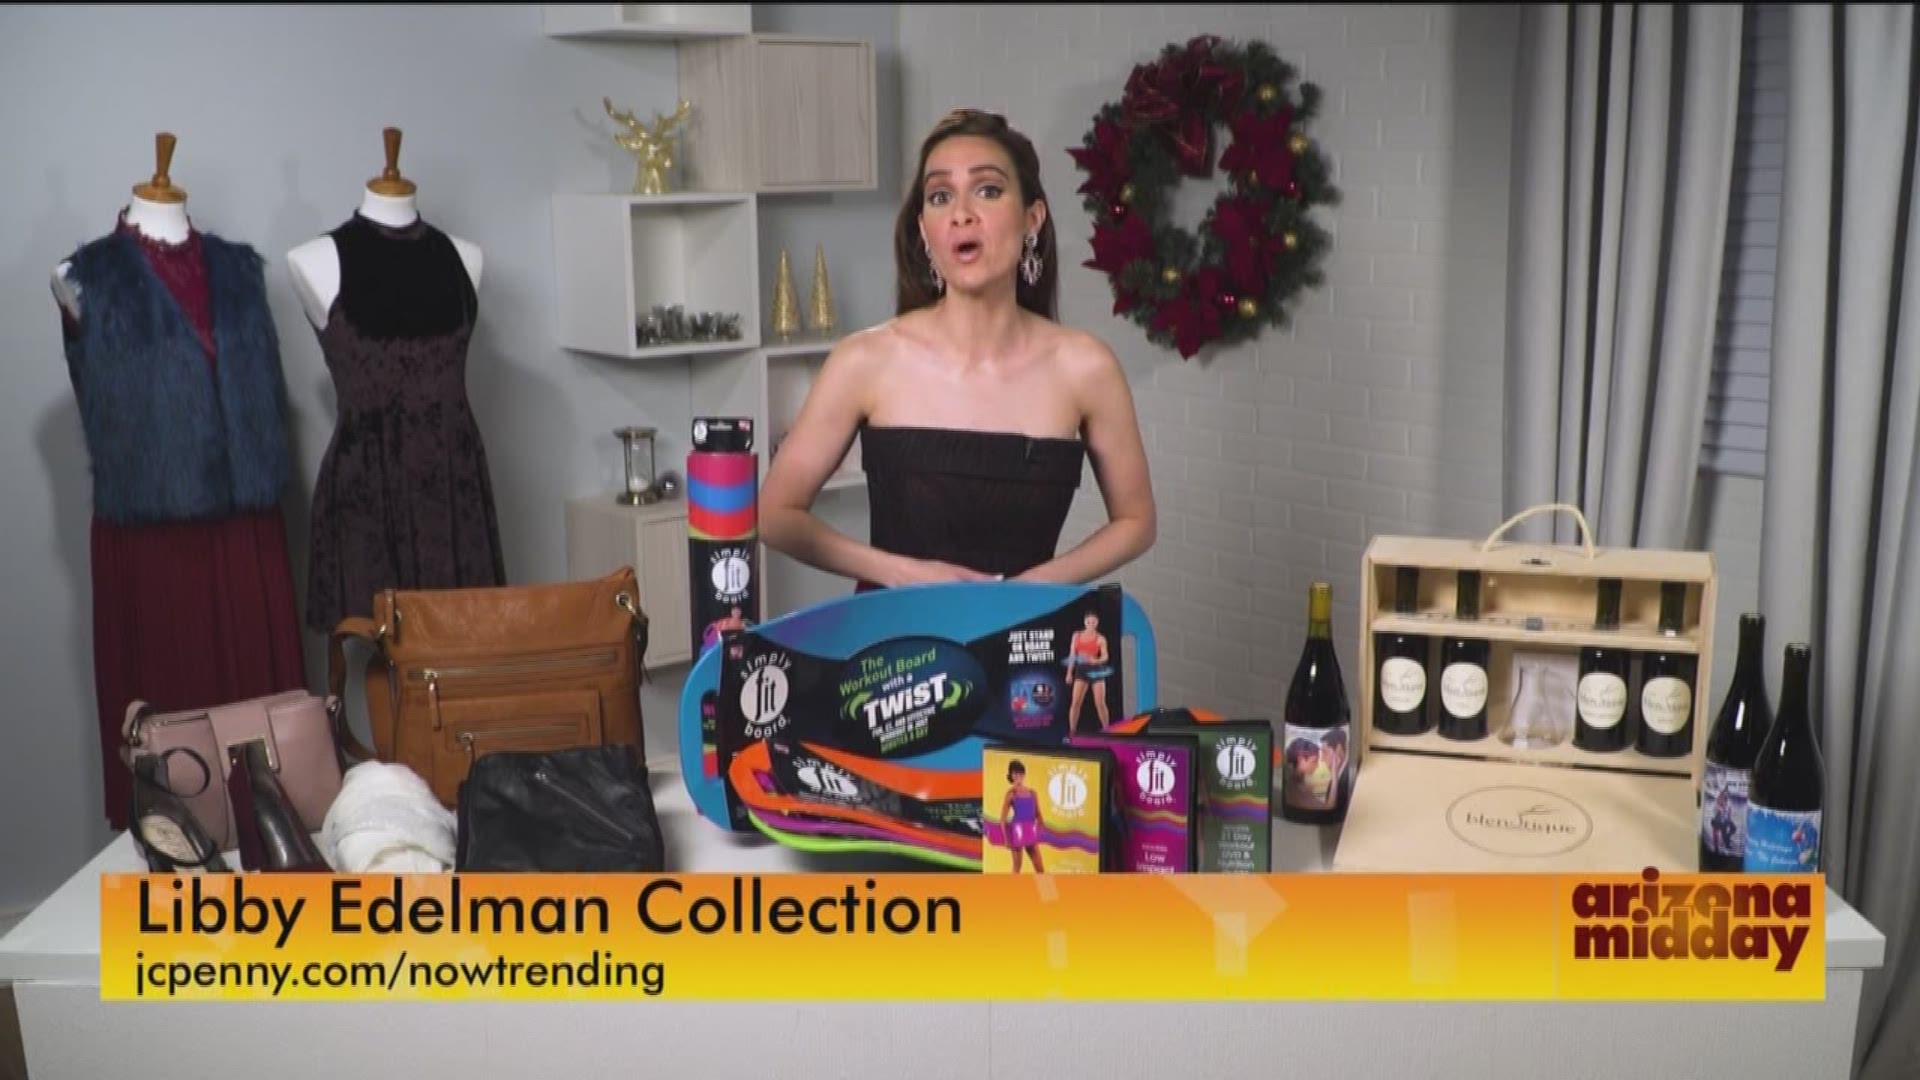 The holiday shopping season is in full swing and if you're feeling overwhelmed Kate DePonte has some suggestions.